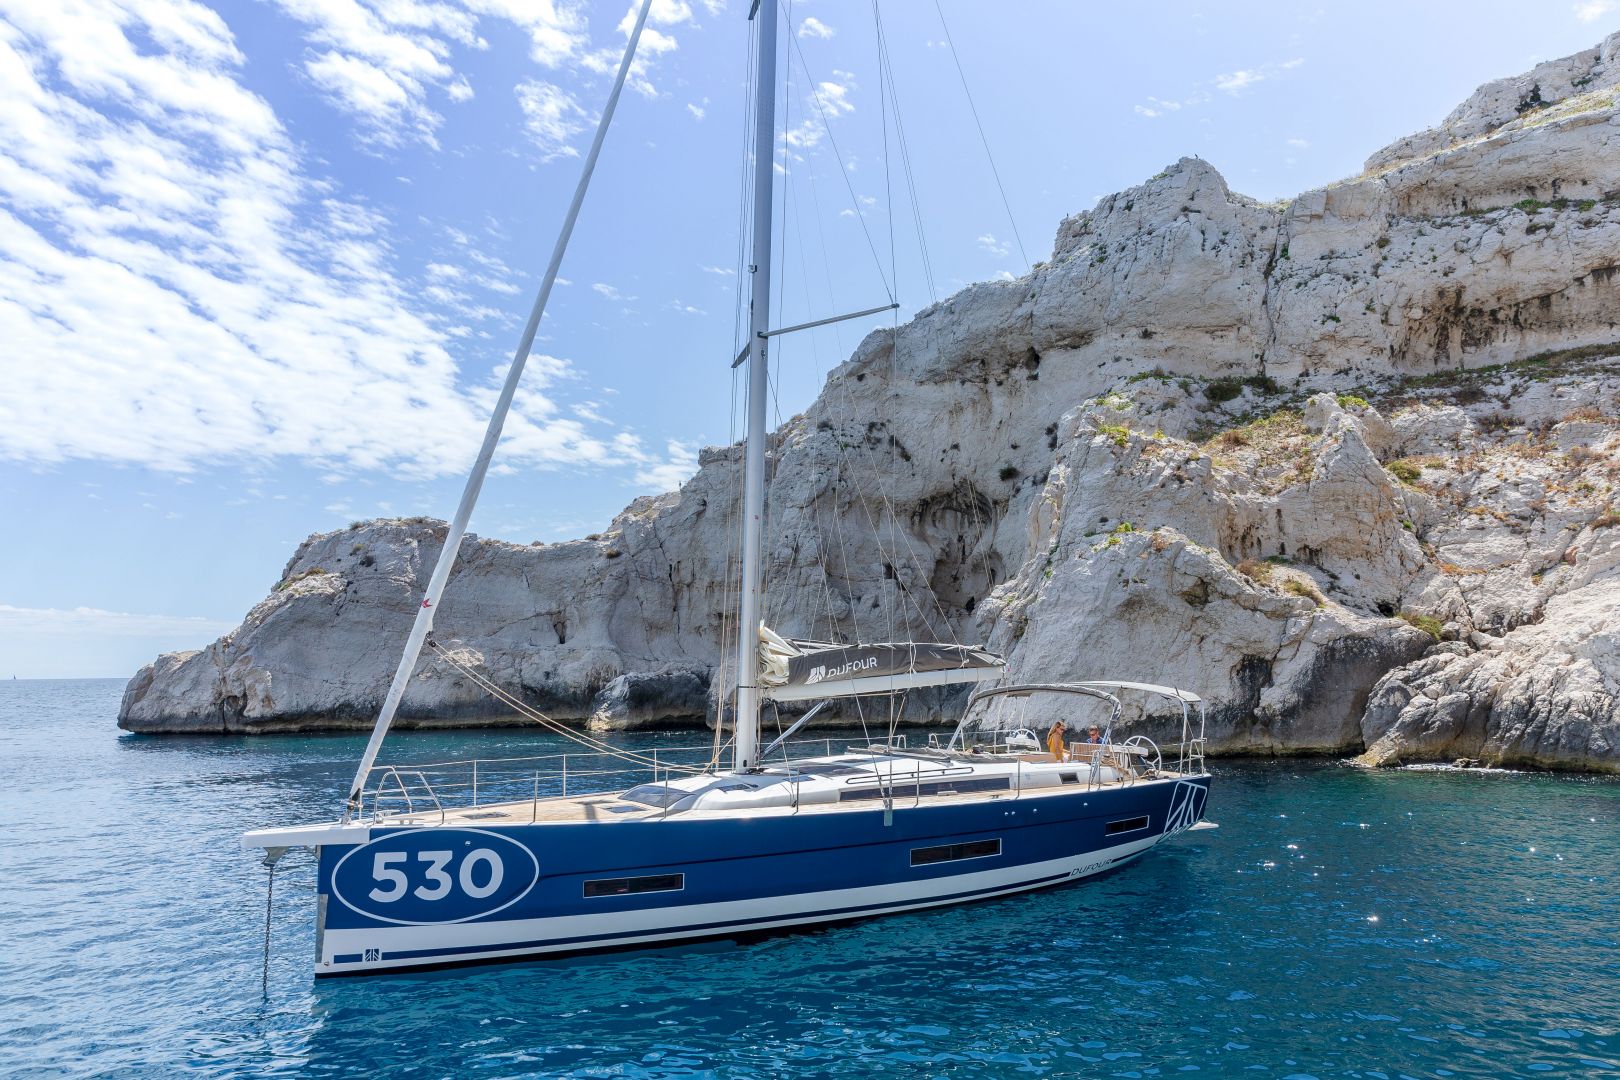 Dufour 530 Smart Electric 6 + 1 cab. - Yacht Charter Saint-Mandrier-sur-Mer & Boat hire in France French Riviera Toulon Saint-Mandrier-sur-Mer Port Pin Rolland 3